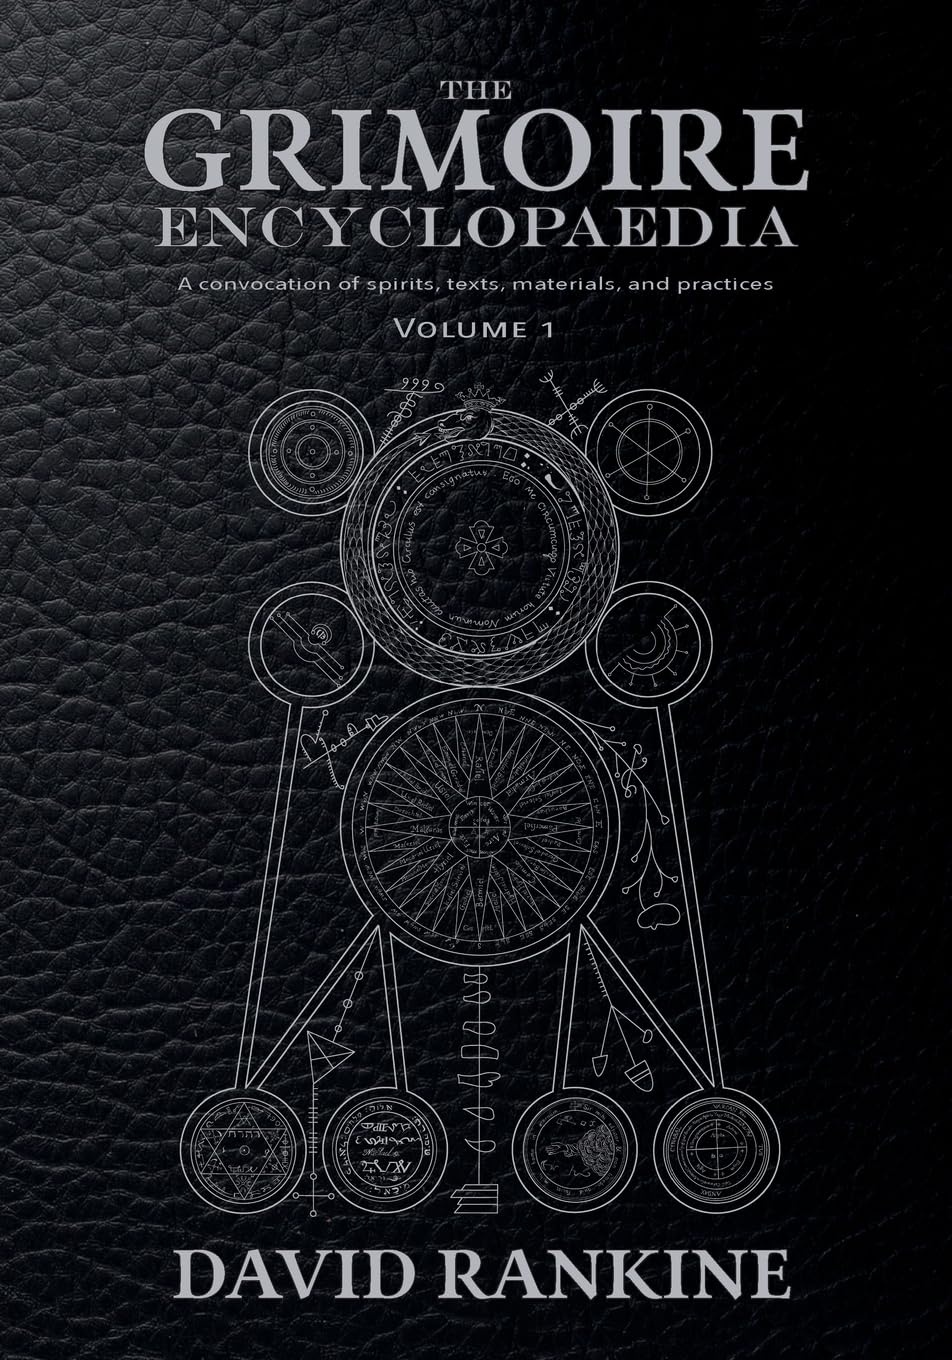 The Grimoire Encyclopaedia: Volume 1: A Convocation of Spirits, Texts,  Materials, and Practices - Pentagram